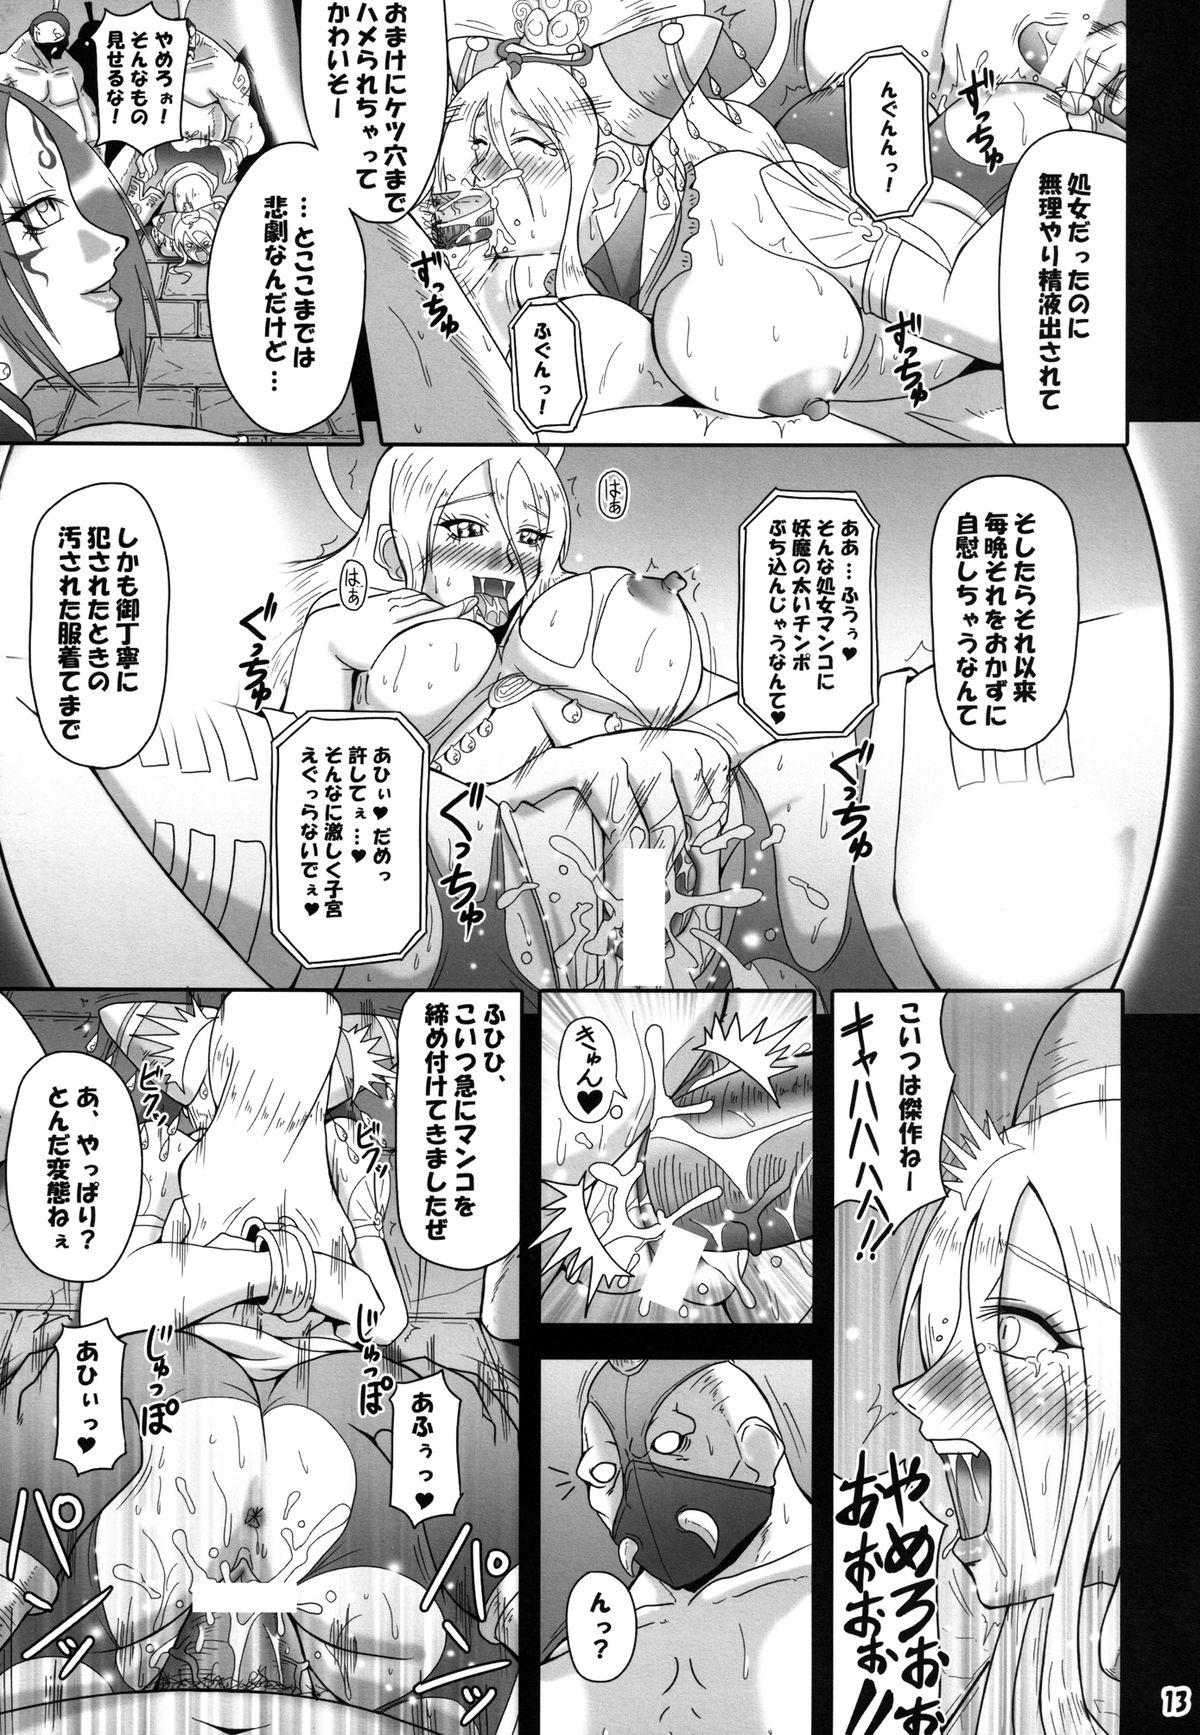 Foot Mugen Houei - Warriors orochi Gaygroup - Page 13